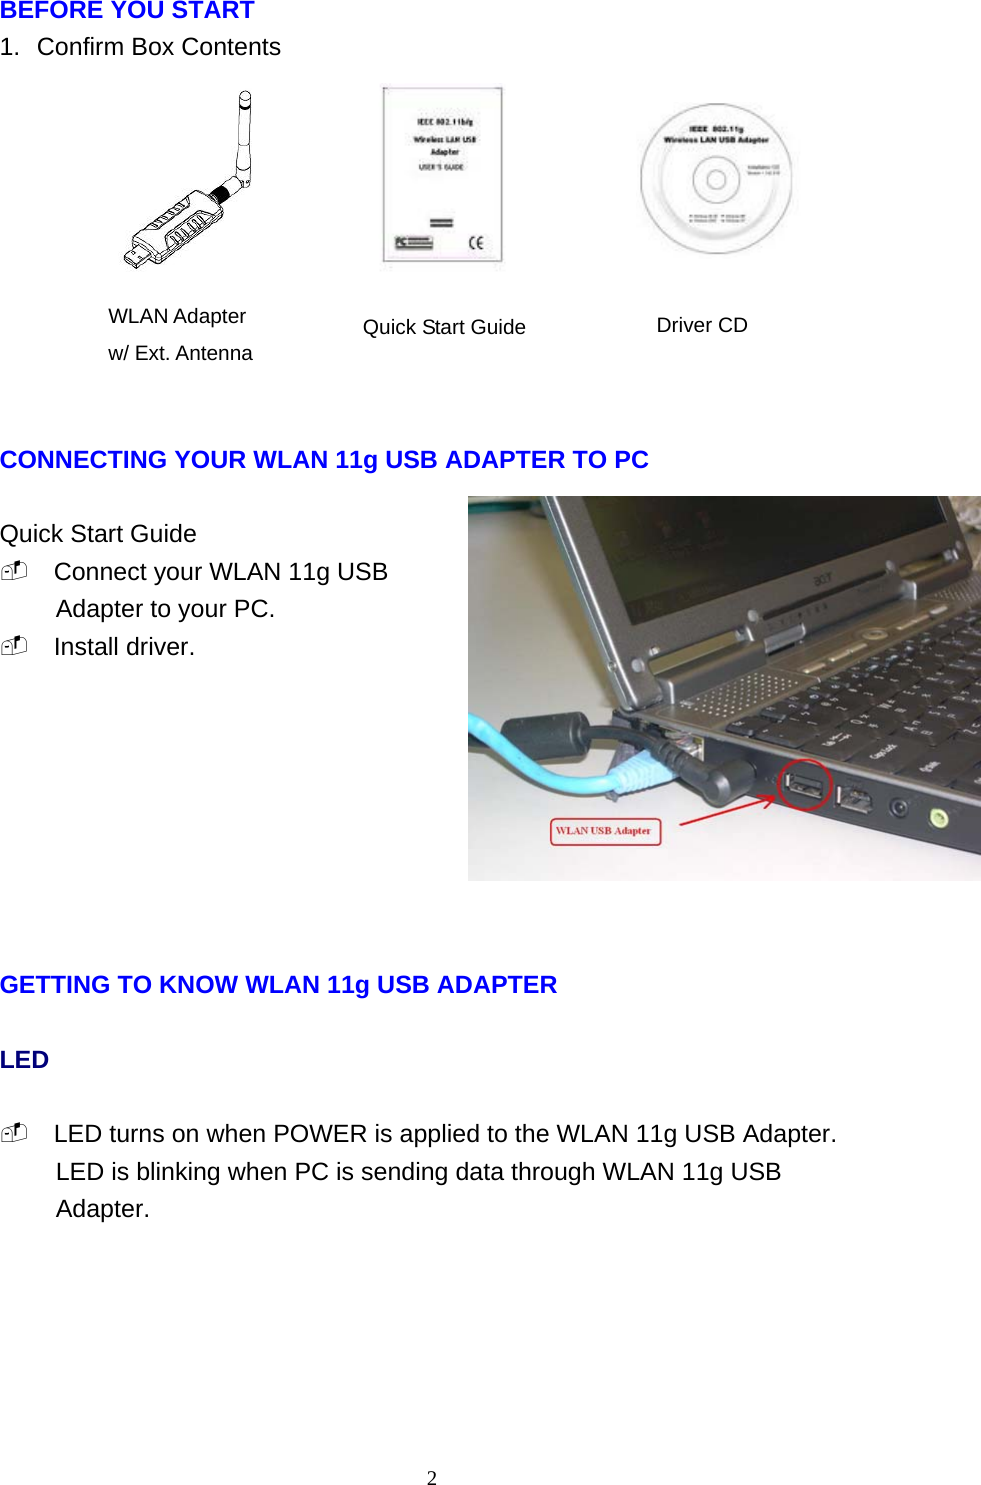    2 BEFORE YOU START 1.  Confirm Box Contents           CONNECTING YOUR WLAN 11g USB ADAPTER TO PC  Quick Start Guide  Connect your WLAN 11g USB Adapter to your PC.  Install driver.         GETTING TO KNOW WLAN 11g USB ADAPTER  LED   LED turns on when POWER is applied to the WLAN 11g USB Adapter. LED is blinking when PC is sending data through WLAN 11g USB Adapter.         WLAN Adapter w/ Ext. Antenna Quick Start Guide Driver CD 